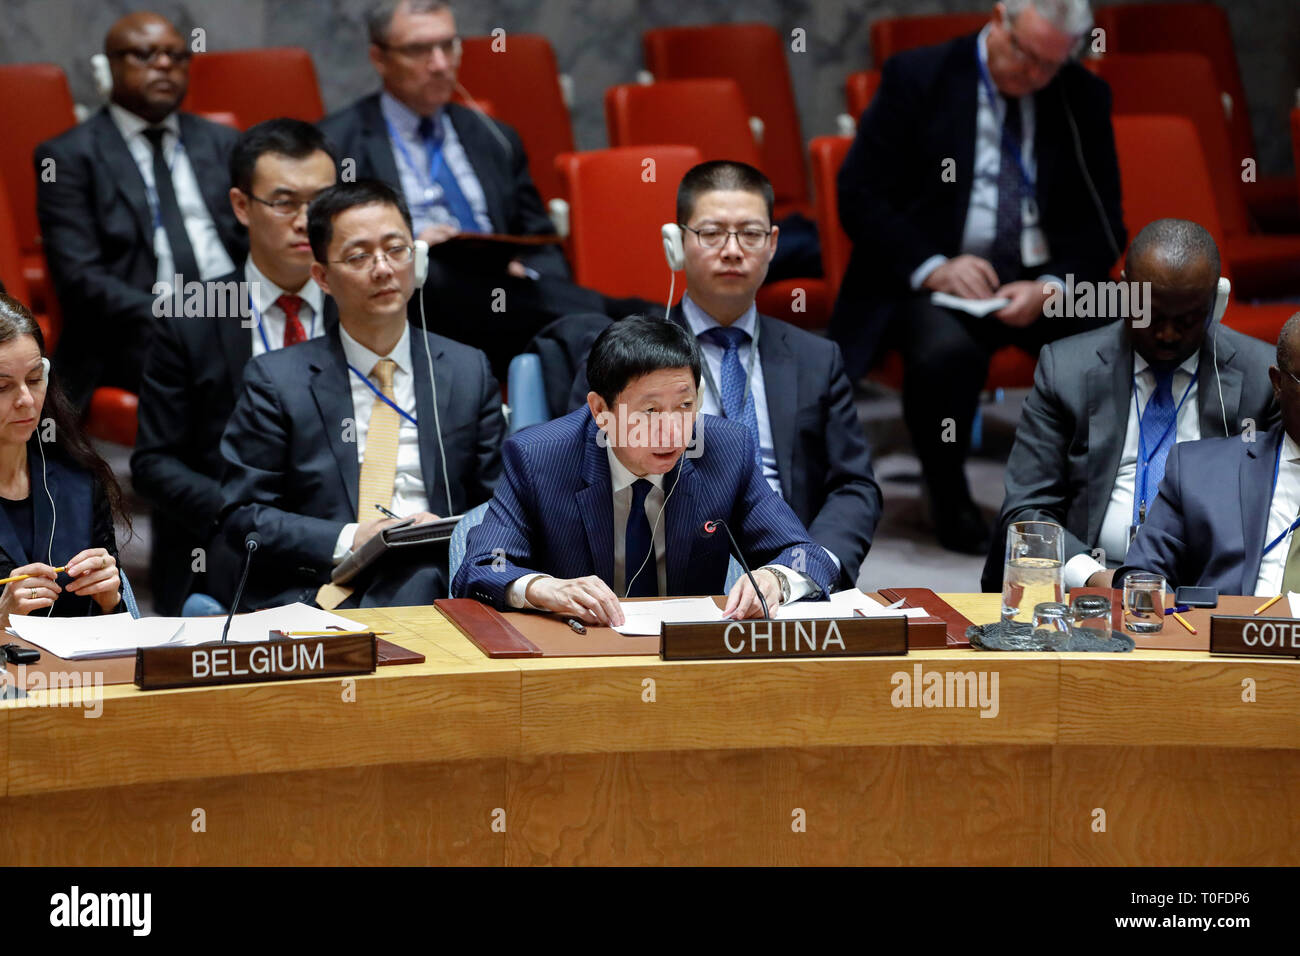 New York, USA.  19th Mar, 2019. Wu Haitao (C, front), charge d'affaires of China's Permanent Mission to the United Nations, addresses the Security Council meeting on non-proliferation of weapons of mass destruction (WMDs), at the United Nations headquarters in New York, March 19, 2019. Wu Haitao said Tuesday that China is firmly opposed to proliferation of weapons of mass destruction (WMDs) and their means of delivery. Credit: Li Muzi/Xinhua/Alamy Live News Stock Photo